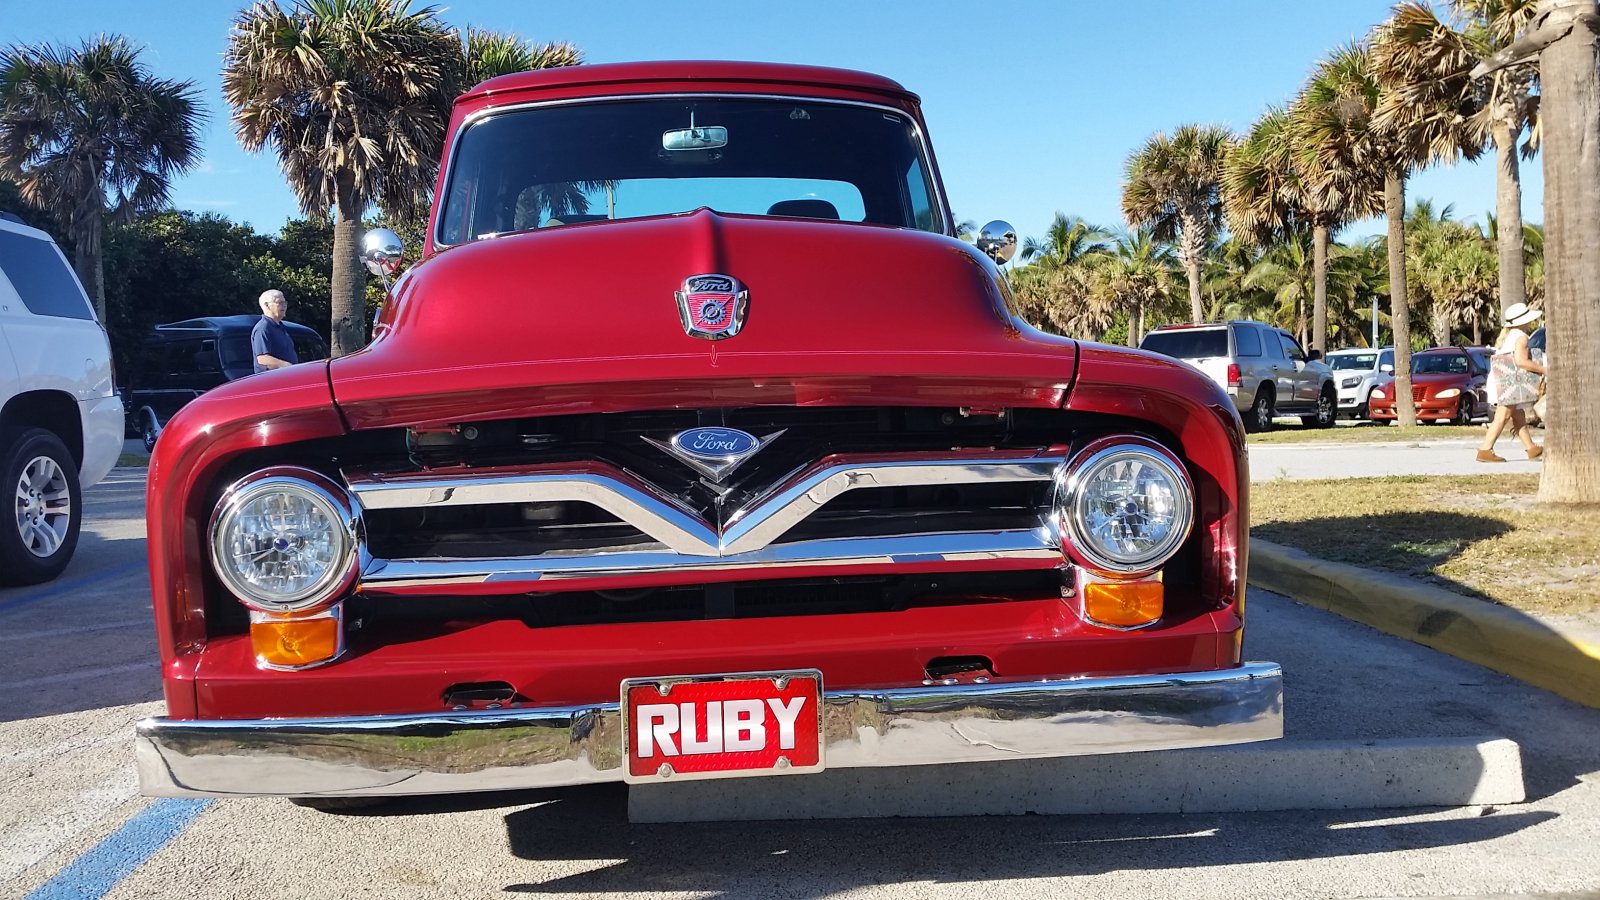 RUBY - 1955 Ford F100 Pickup Truck Crate With a 300HP 2.jpg